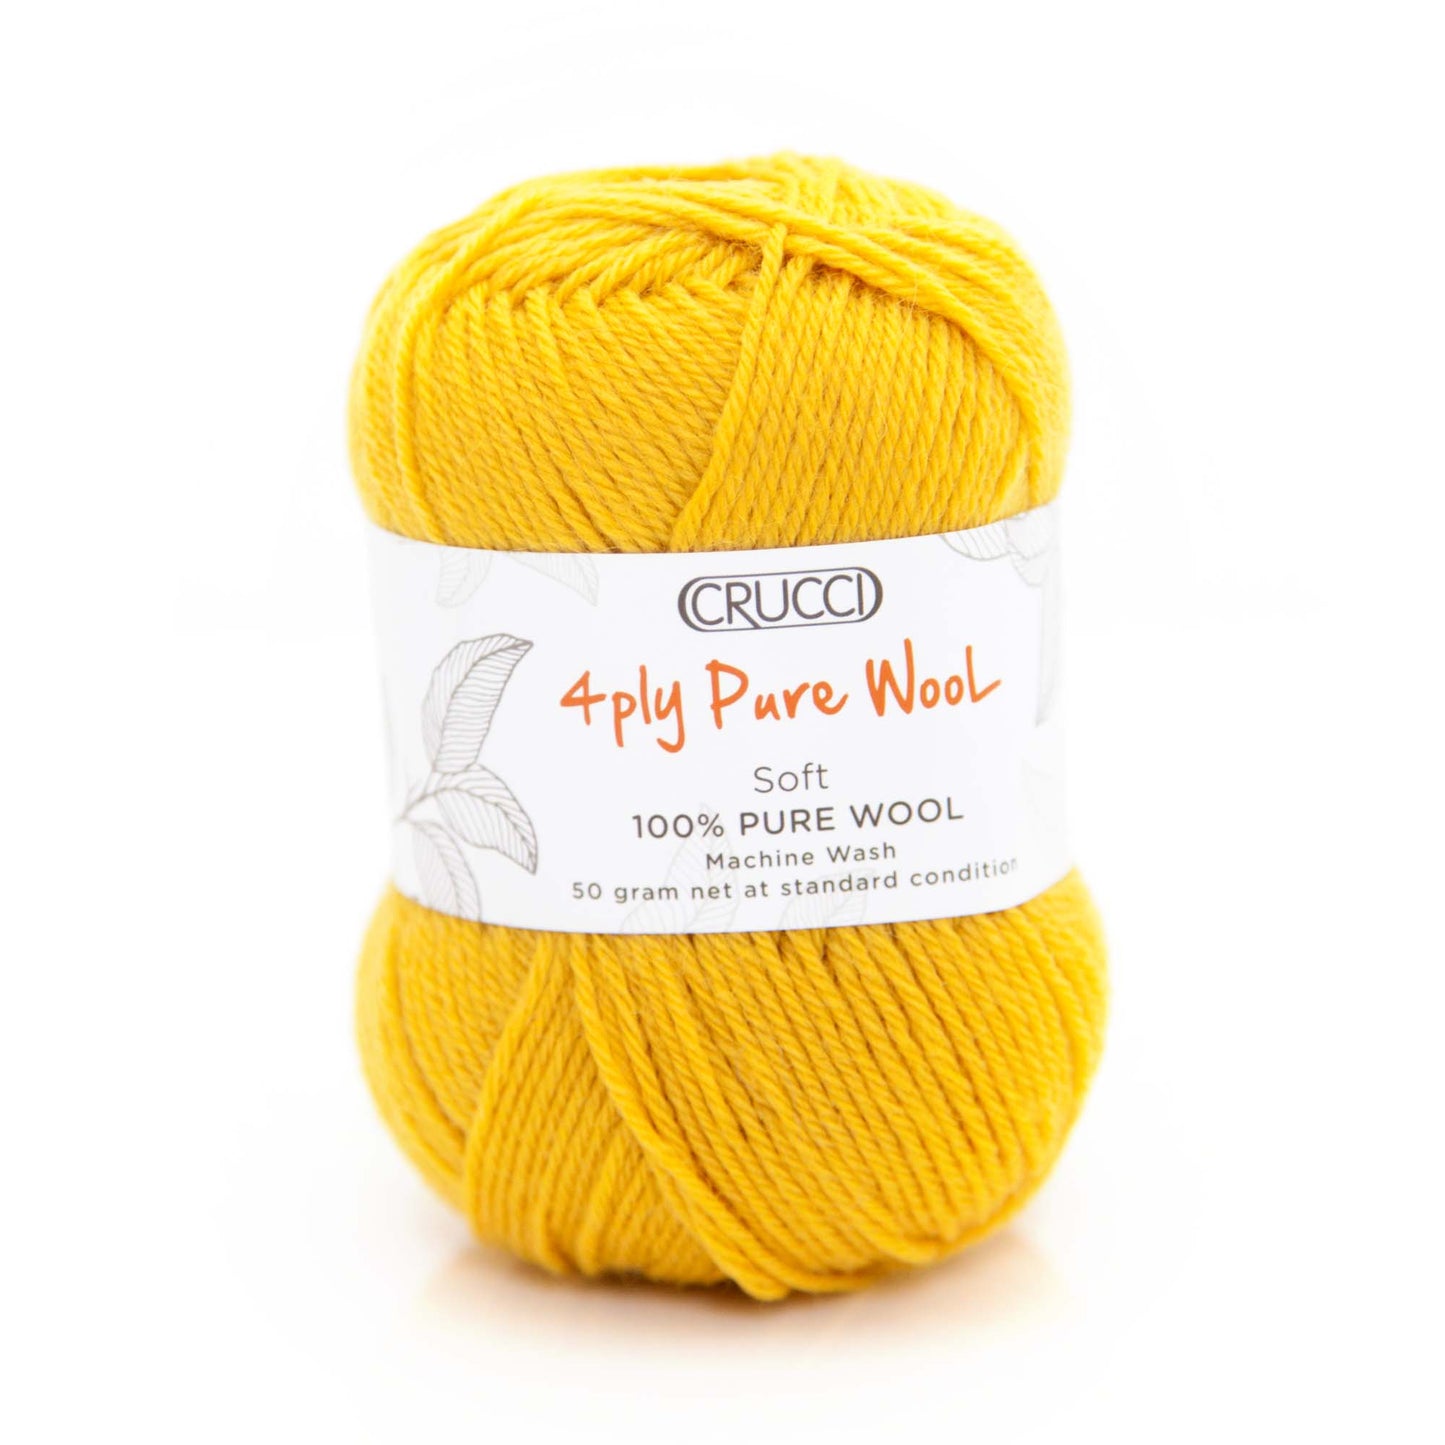 4 Ply Pure Wool